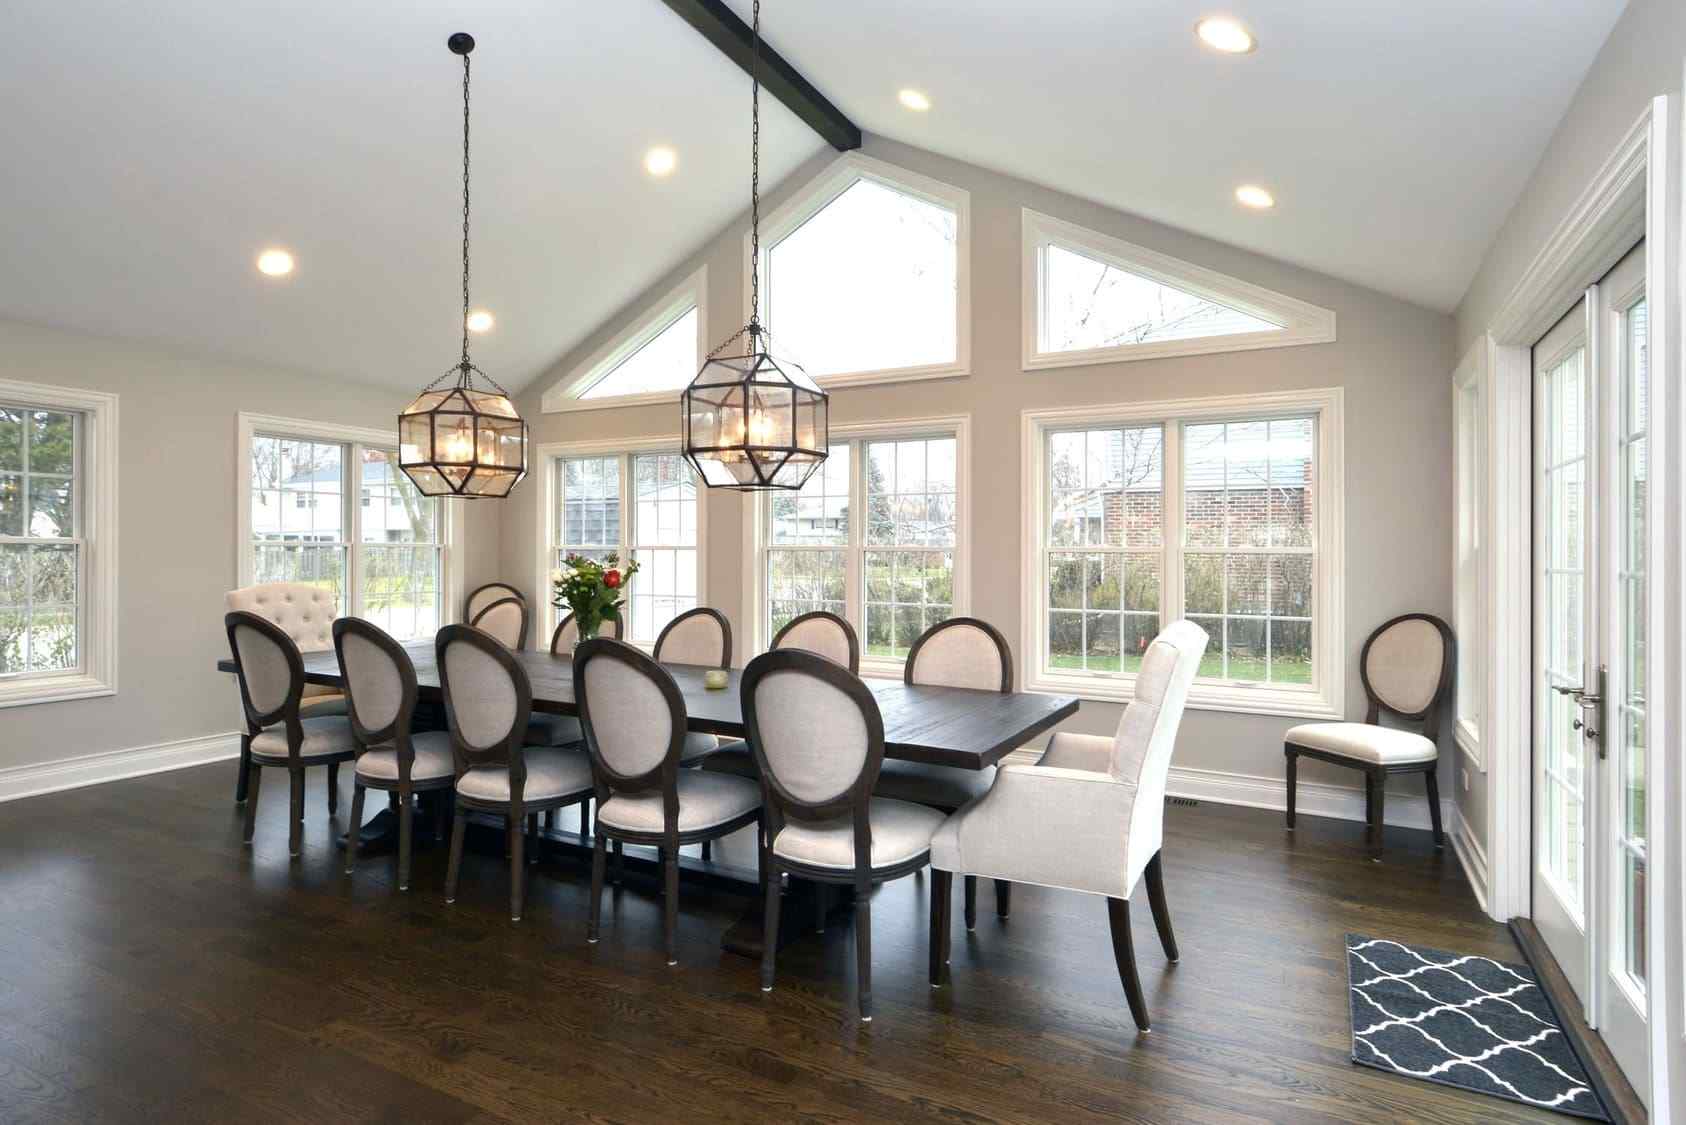 Modern Home Addition Style With Dining Area Below Two Glass Light Fixtures and White Vaulted Ceilings